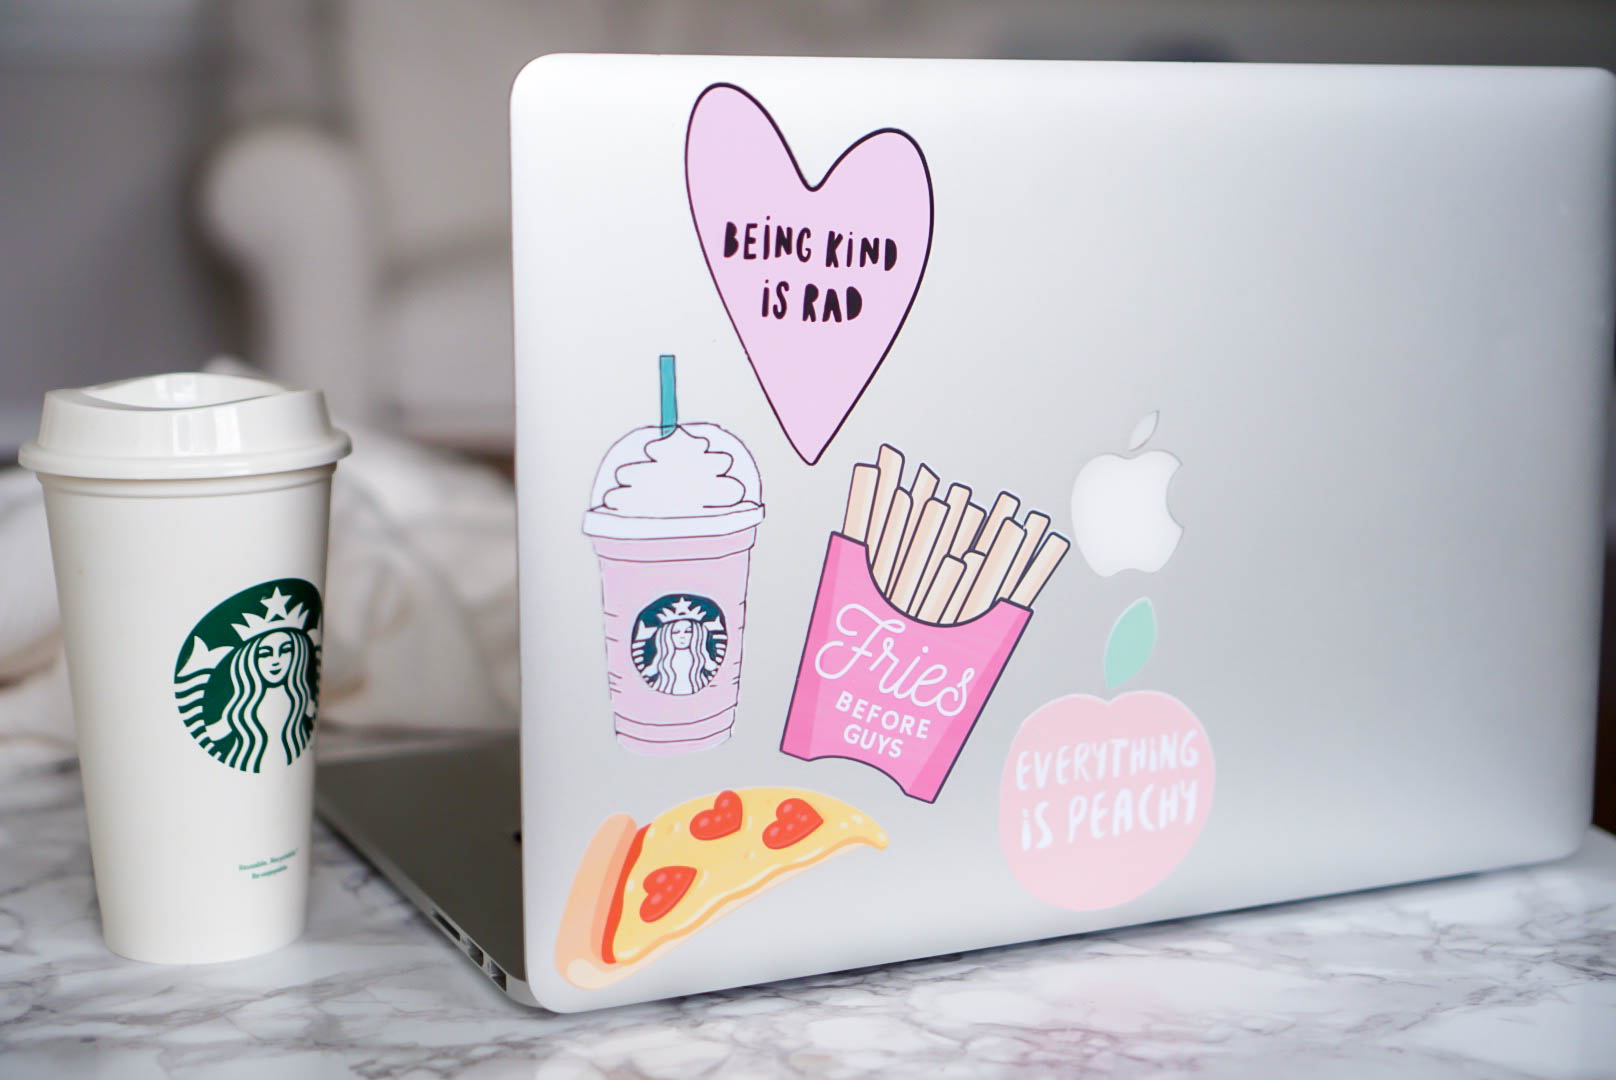 How To Make Your Own Laptop Decals With Printable Vinyl